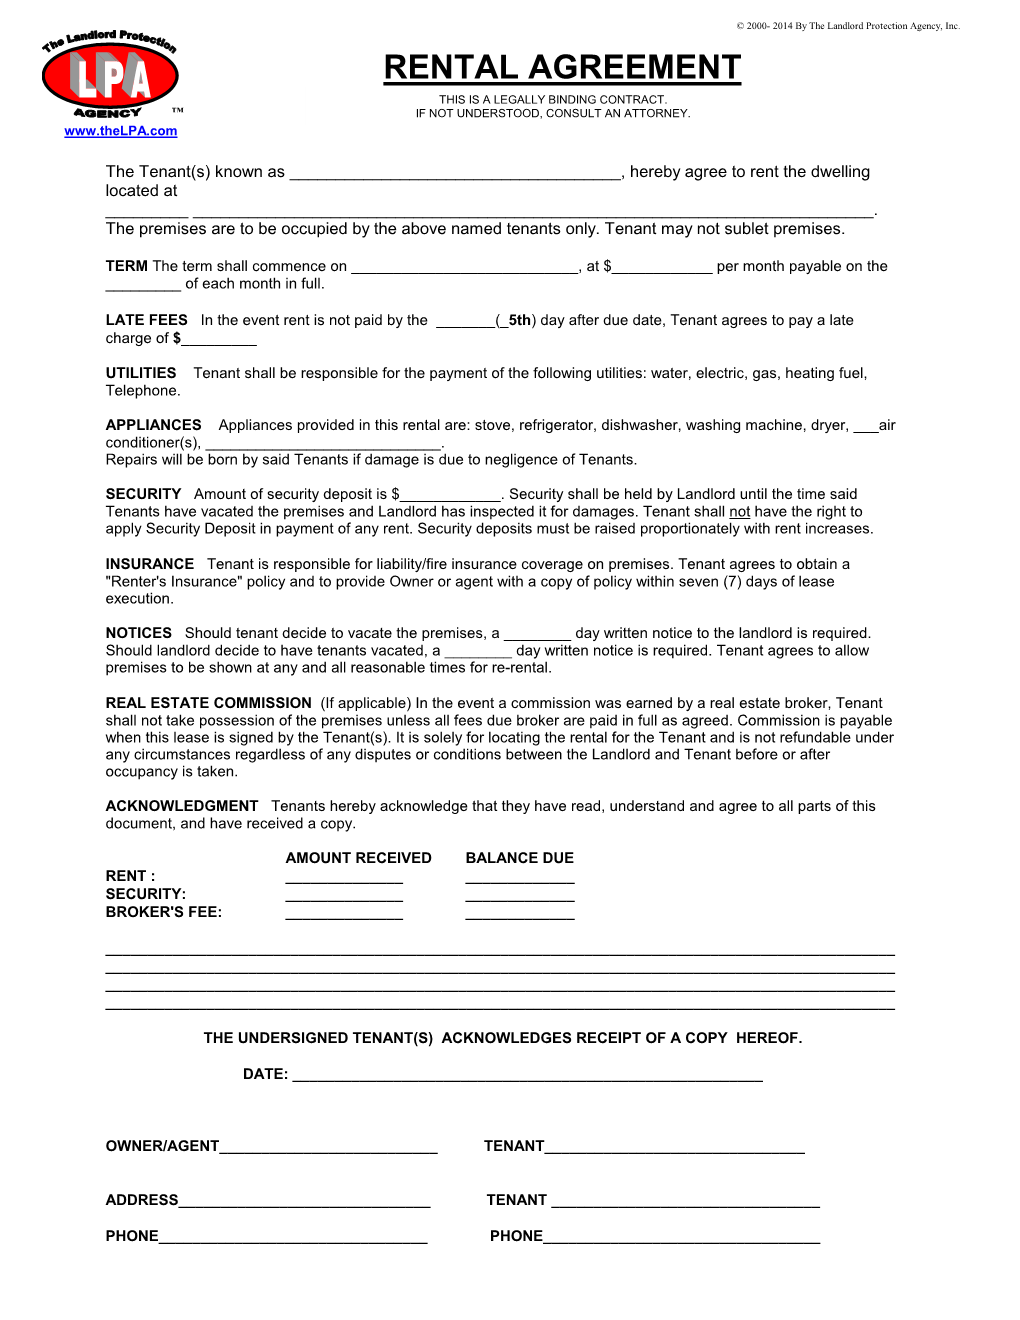 Basic Rental Agreement Form Tips: When Filling out Your LPA Form, Please Take Note of the Following